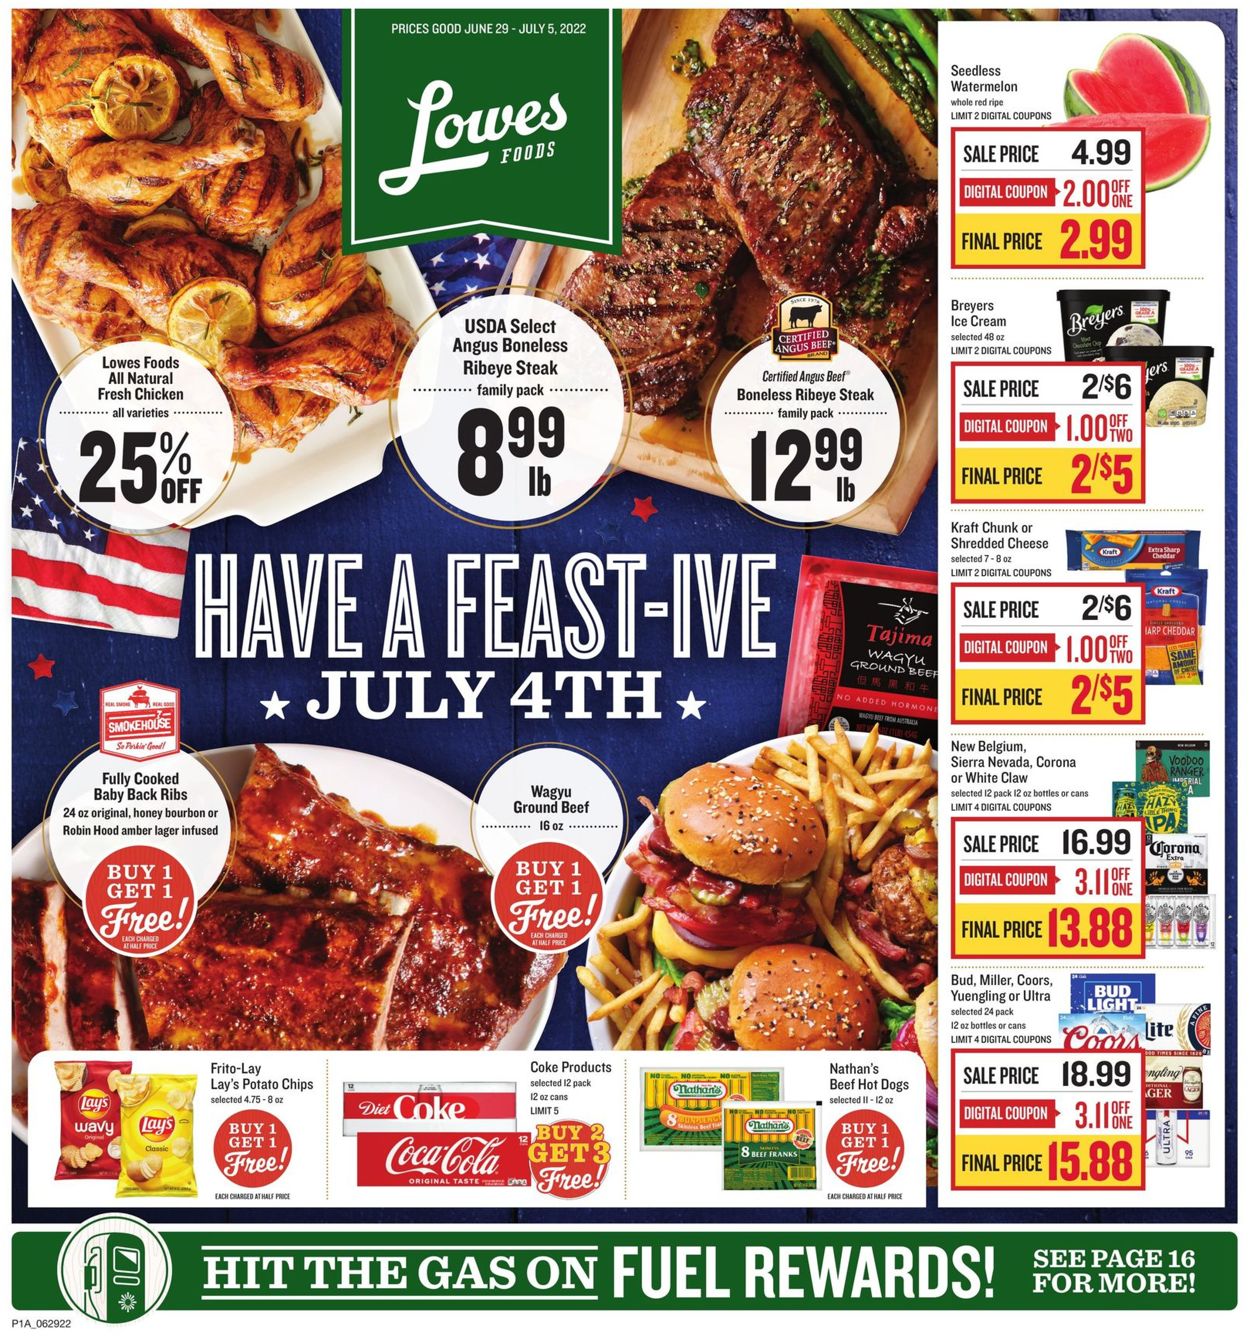 Lowes Foods - 4th of July Sale Weekly Ad Circular - valid 06/29-07/05/2022